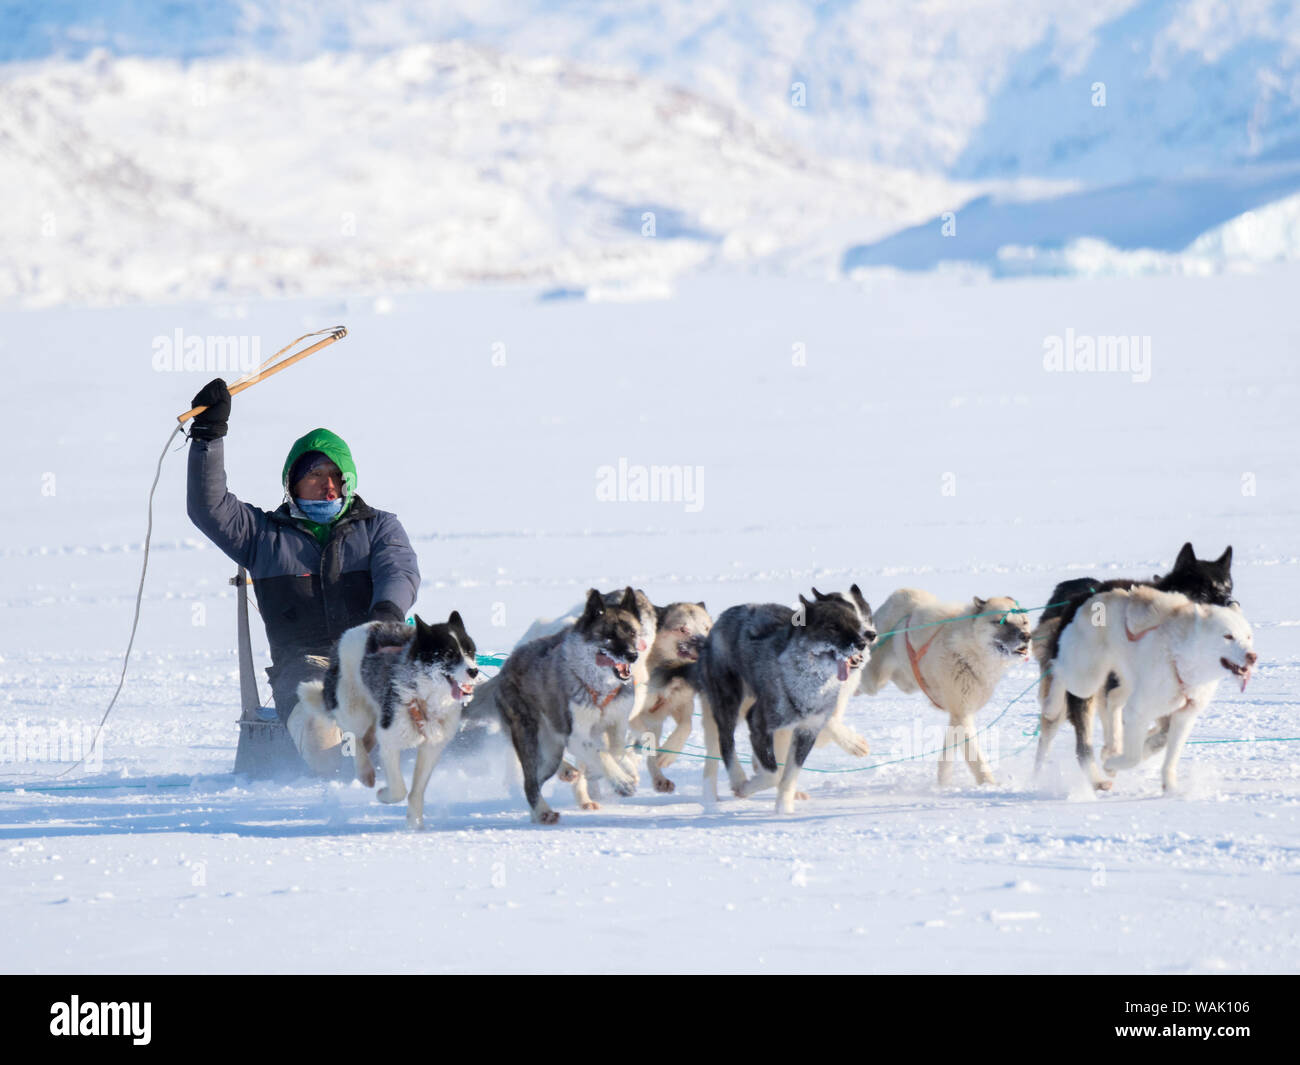 Sled dog race on frozen fjord, Saatut near Uummannaq. The finish of Anton Street, winner. Qualifier for the Greenland Championships 2018. (Editorial Use Only) Stock Photo